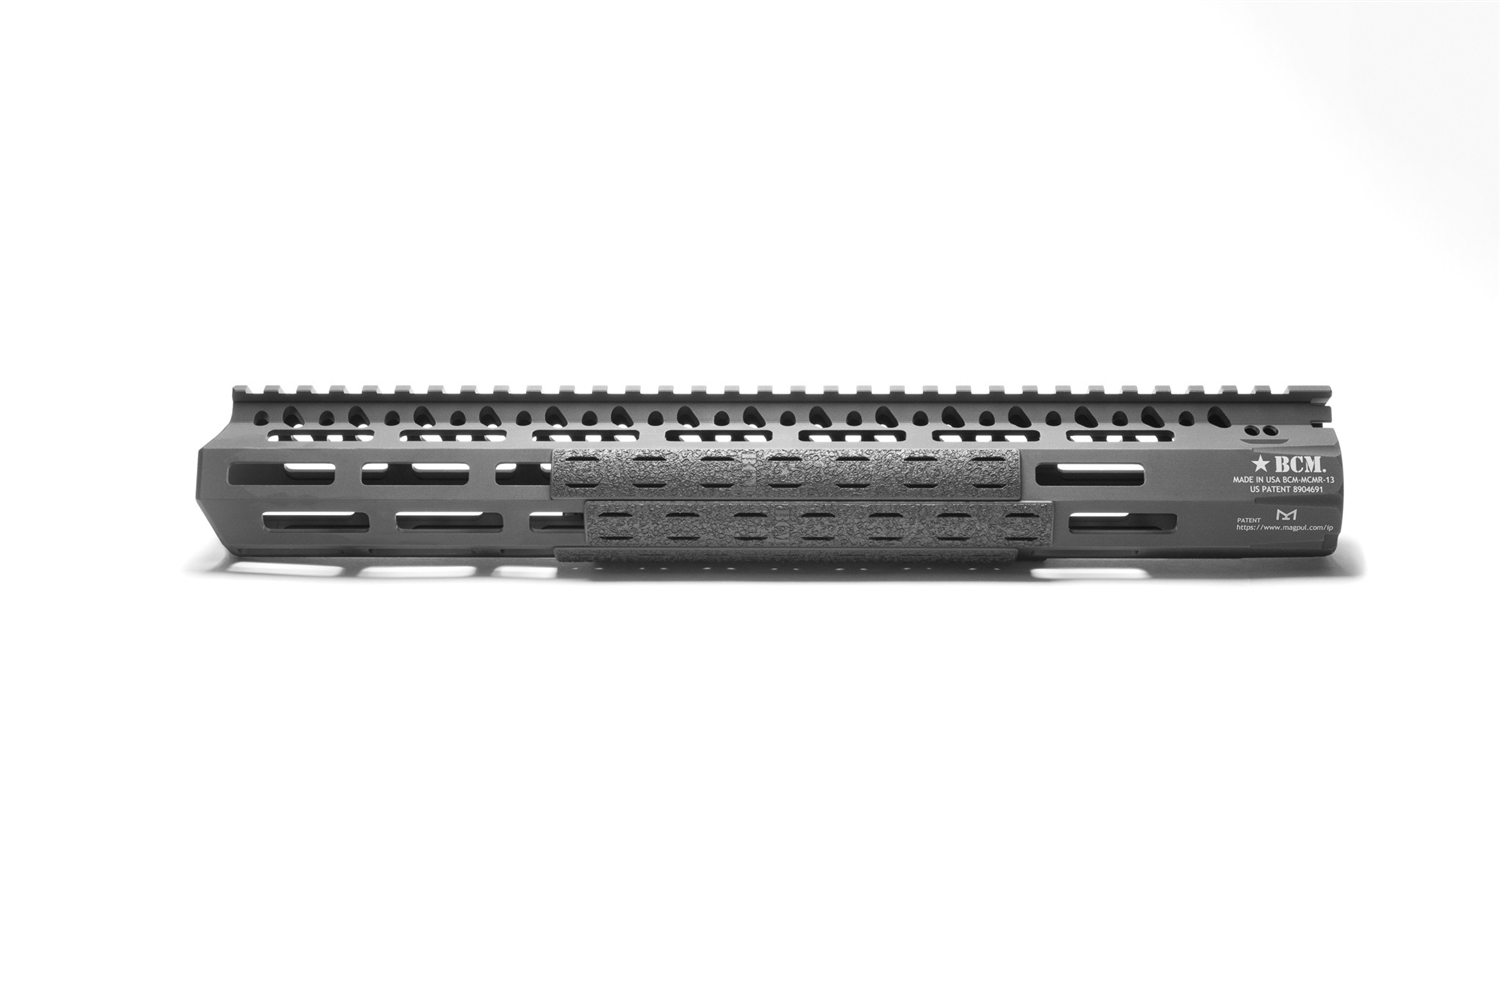 Each Kit contains 5 panel strips Perfect fit for your BCM MCMR Handguard, a...